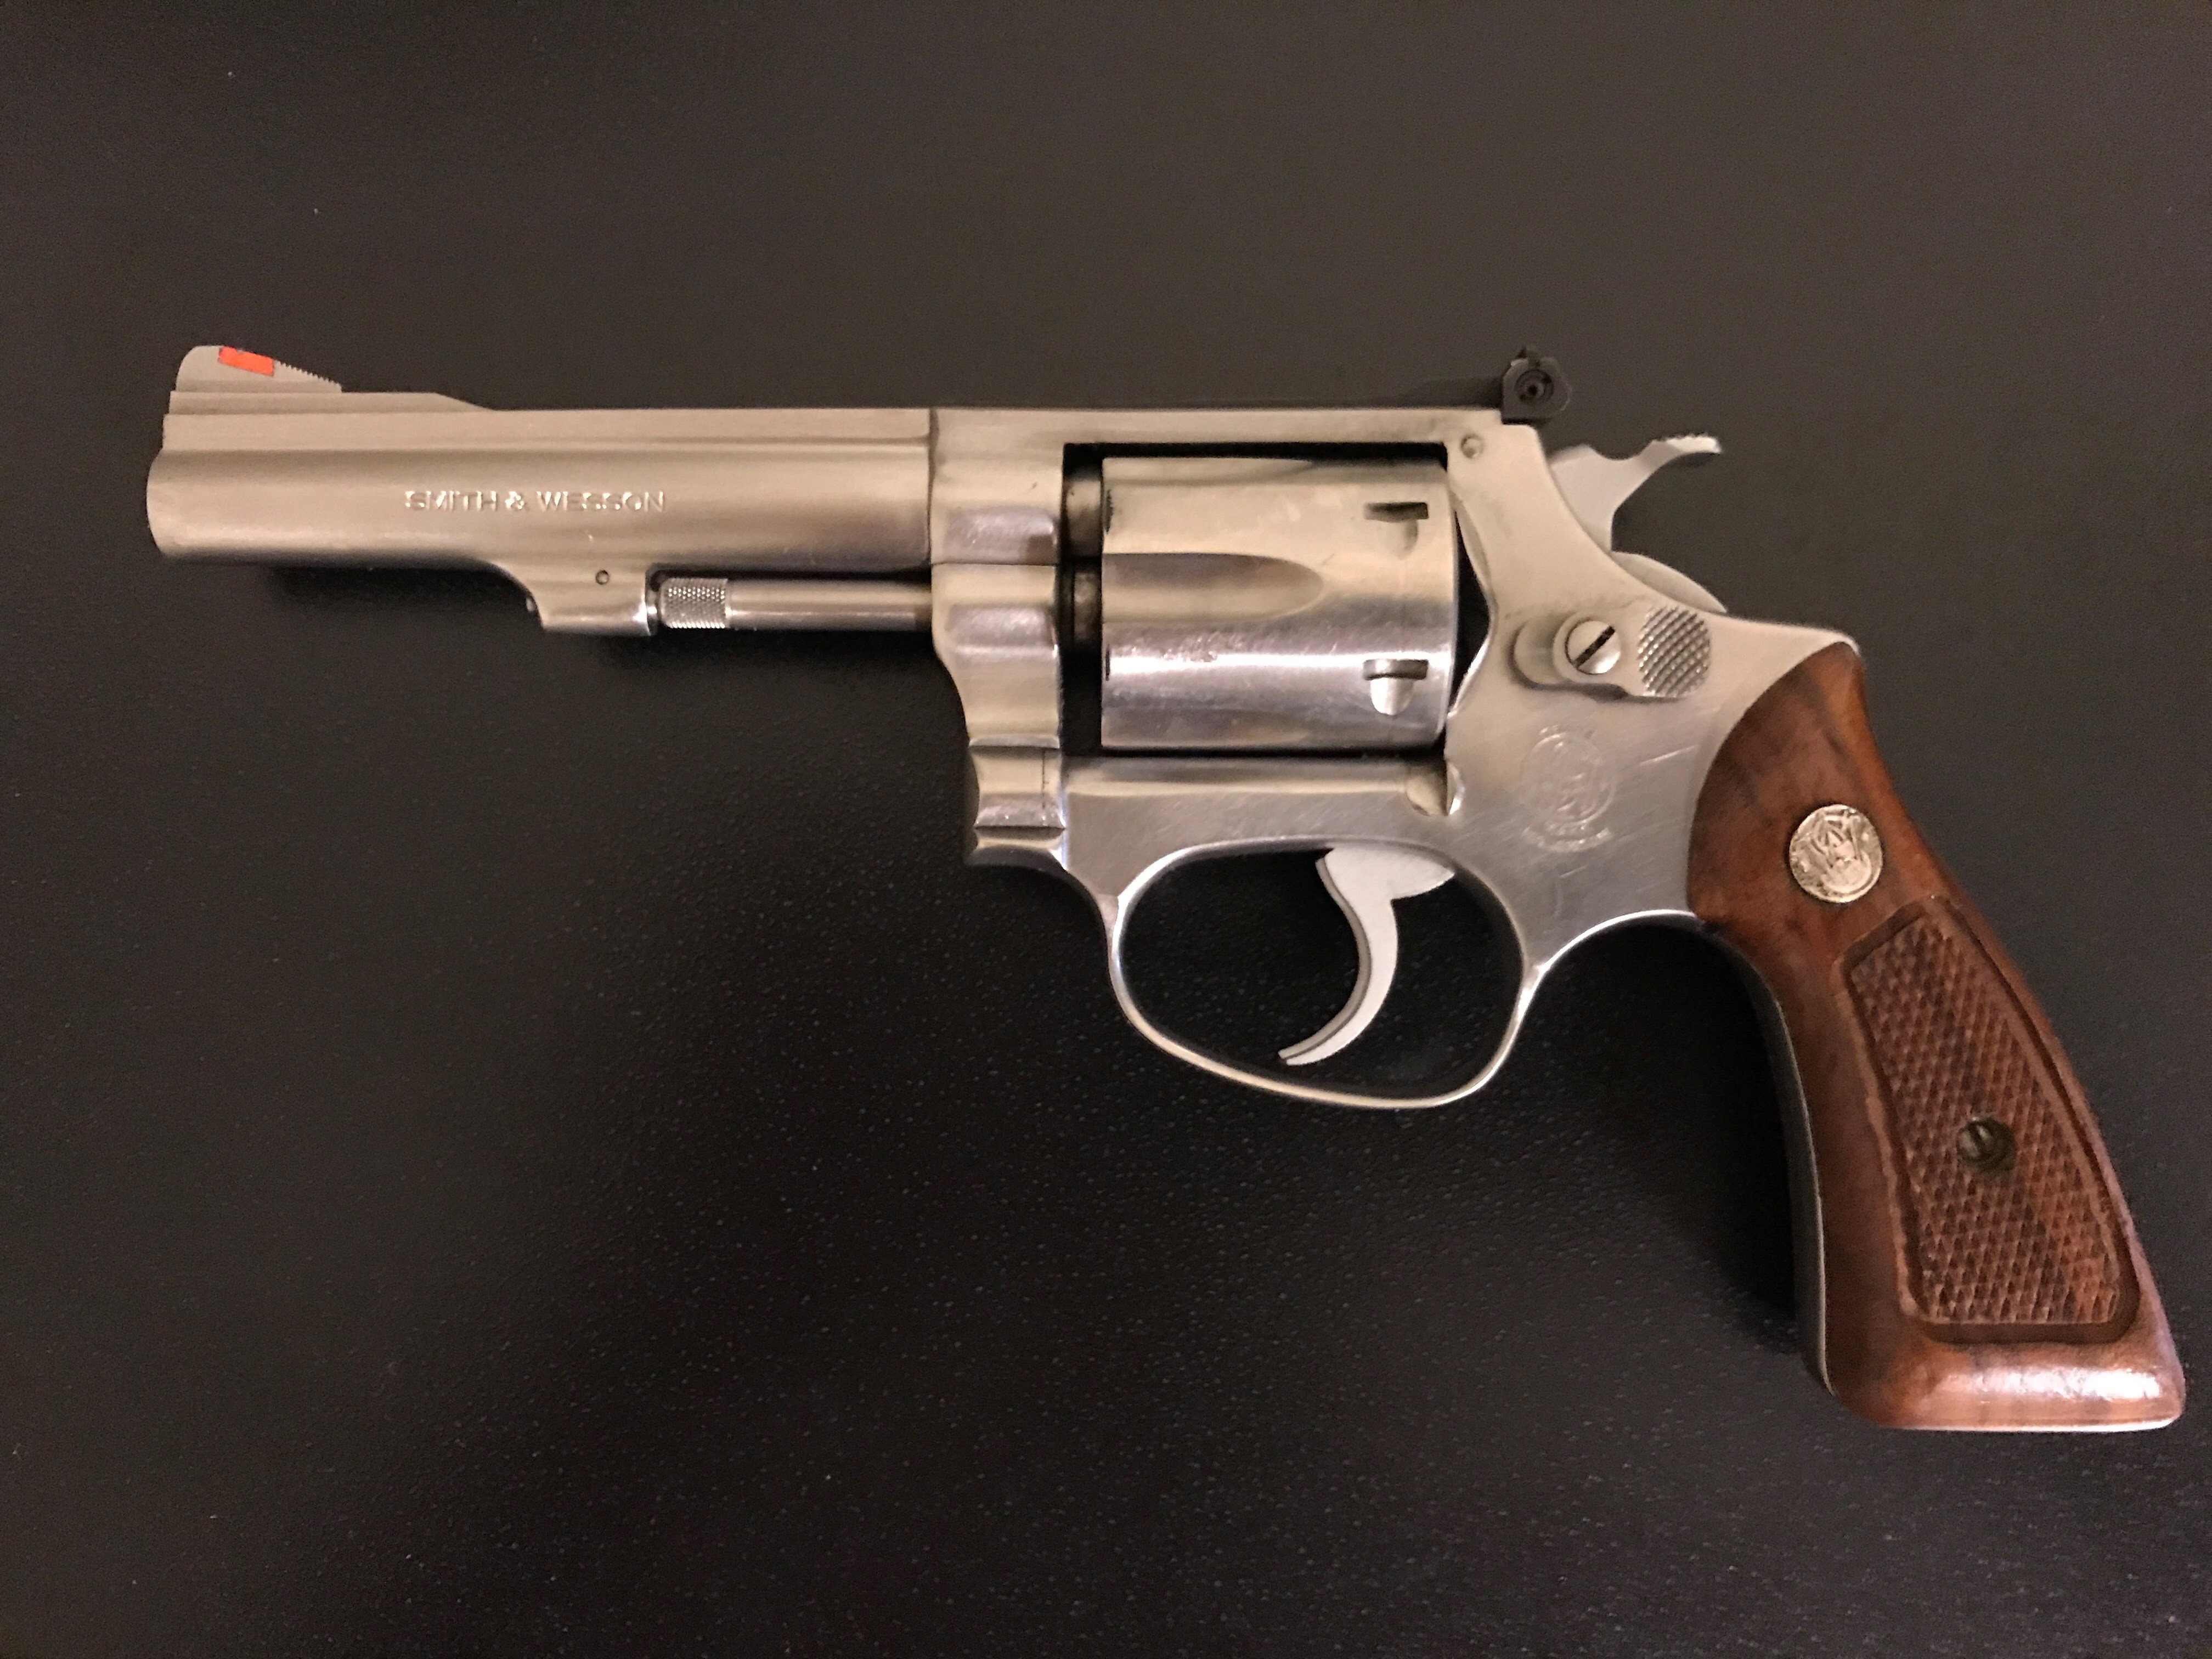 smith and wesson forum